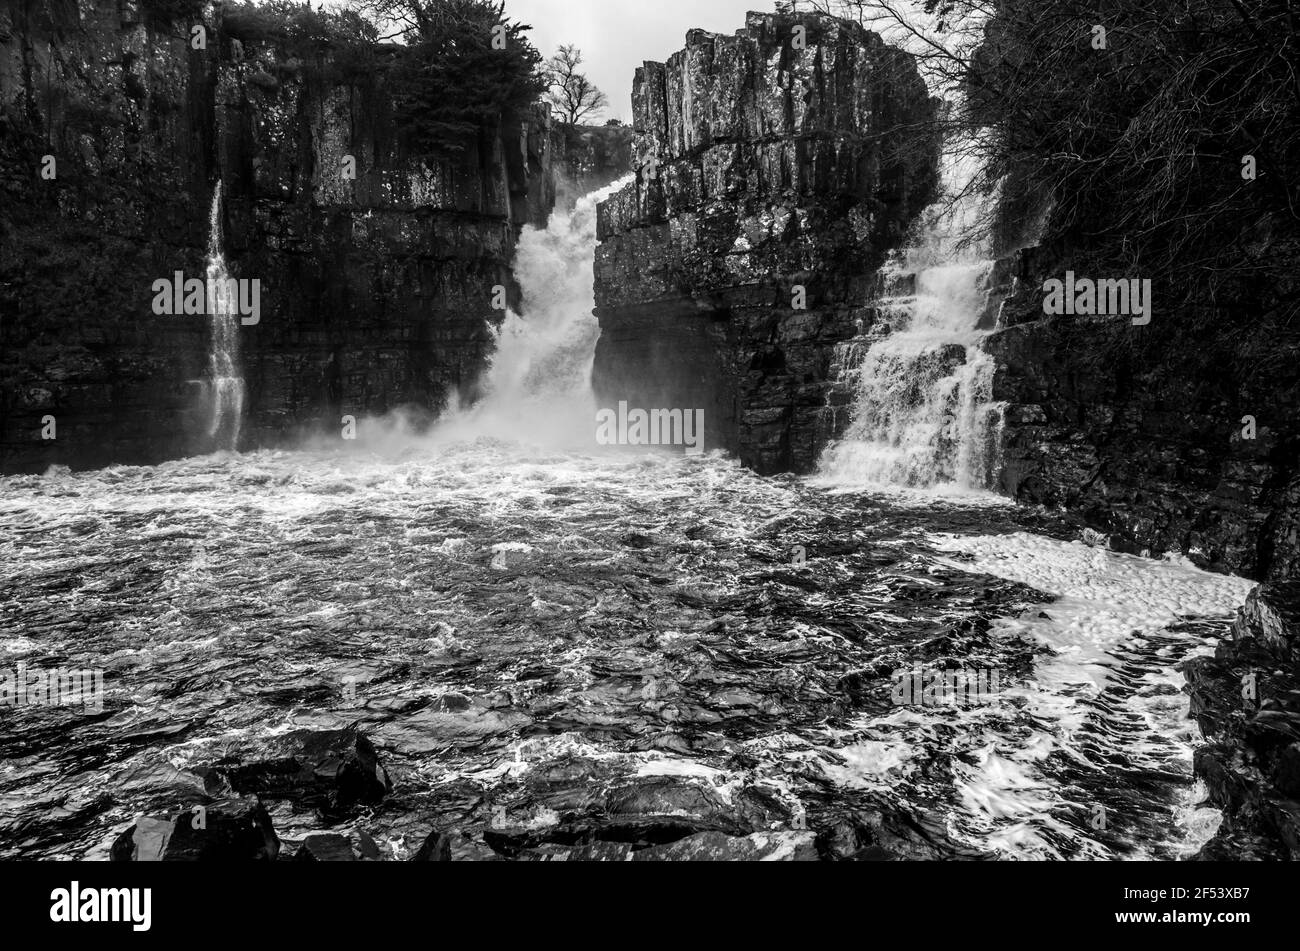 High Force waterfall, on the River Tees, Upper Teesdale, County Durham, UK. B&W. Stock Photo